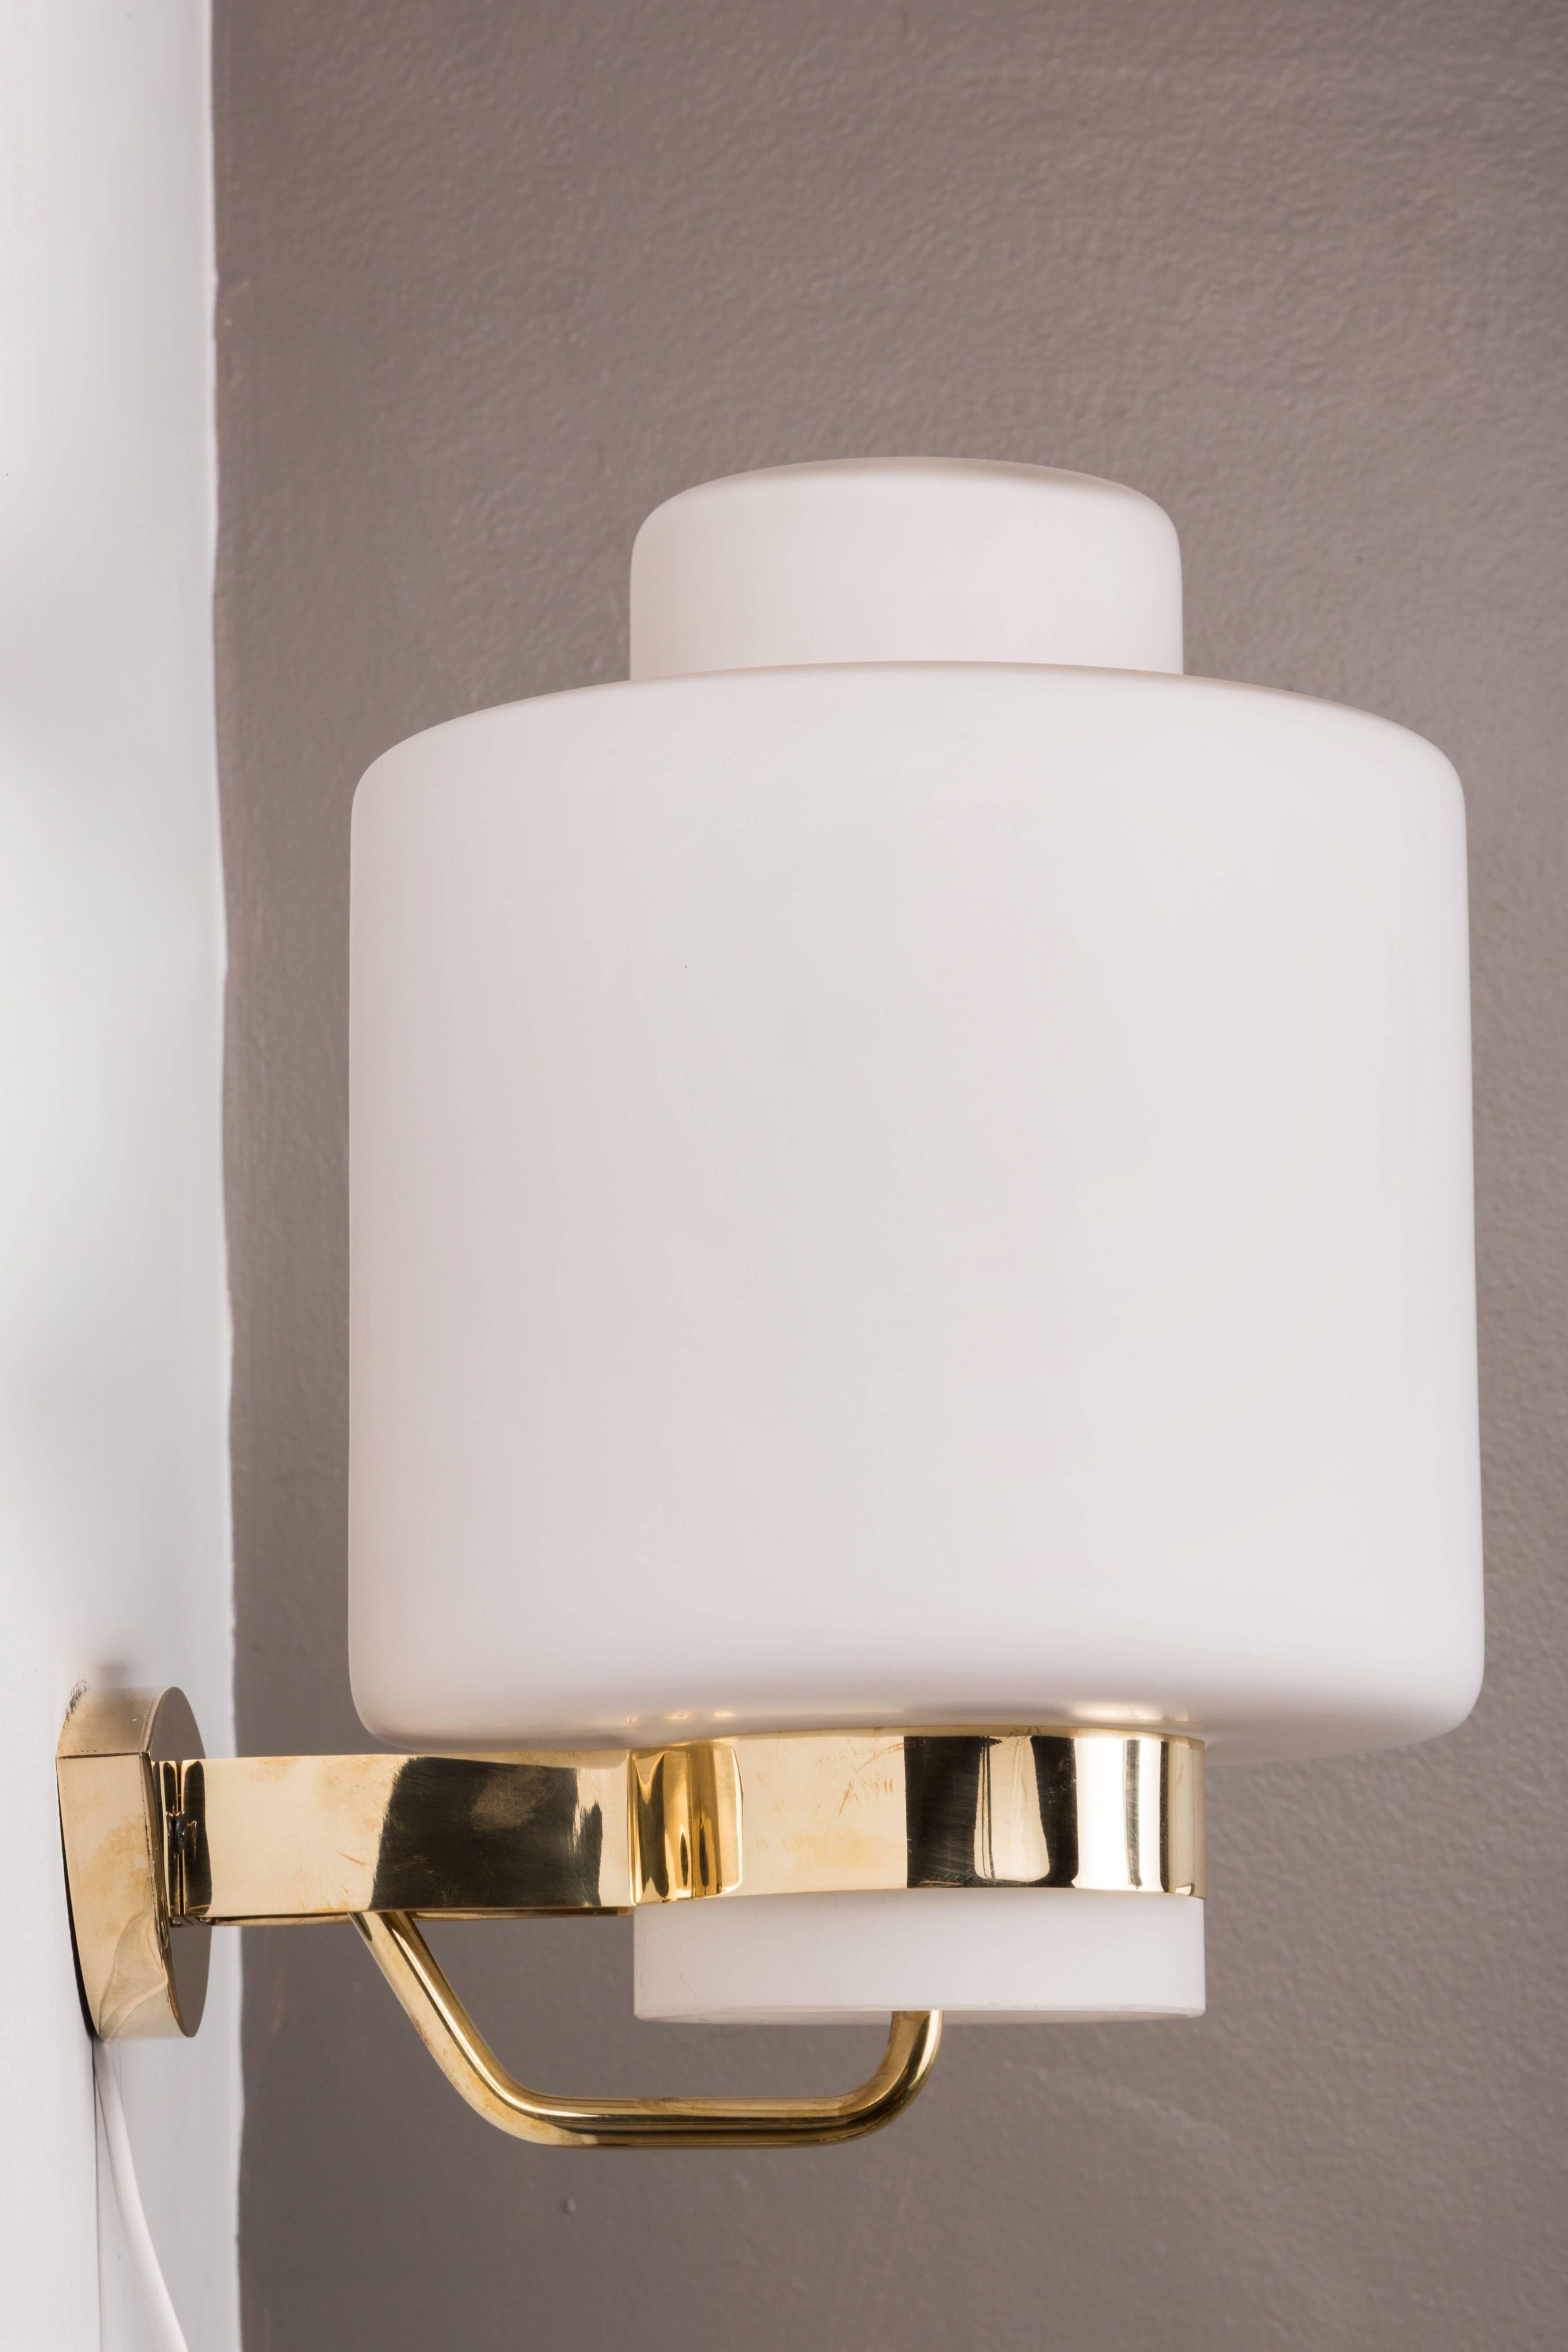 1950s Stilnovo '2120' Brass and Glass Sconces. Executed in brass and thick opaline matte glass. A sculptural and refined design characteristic of 1950s Italian design at its highest level.

Literature: Stilnovo Catalog 1960, p. 46.